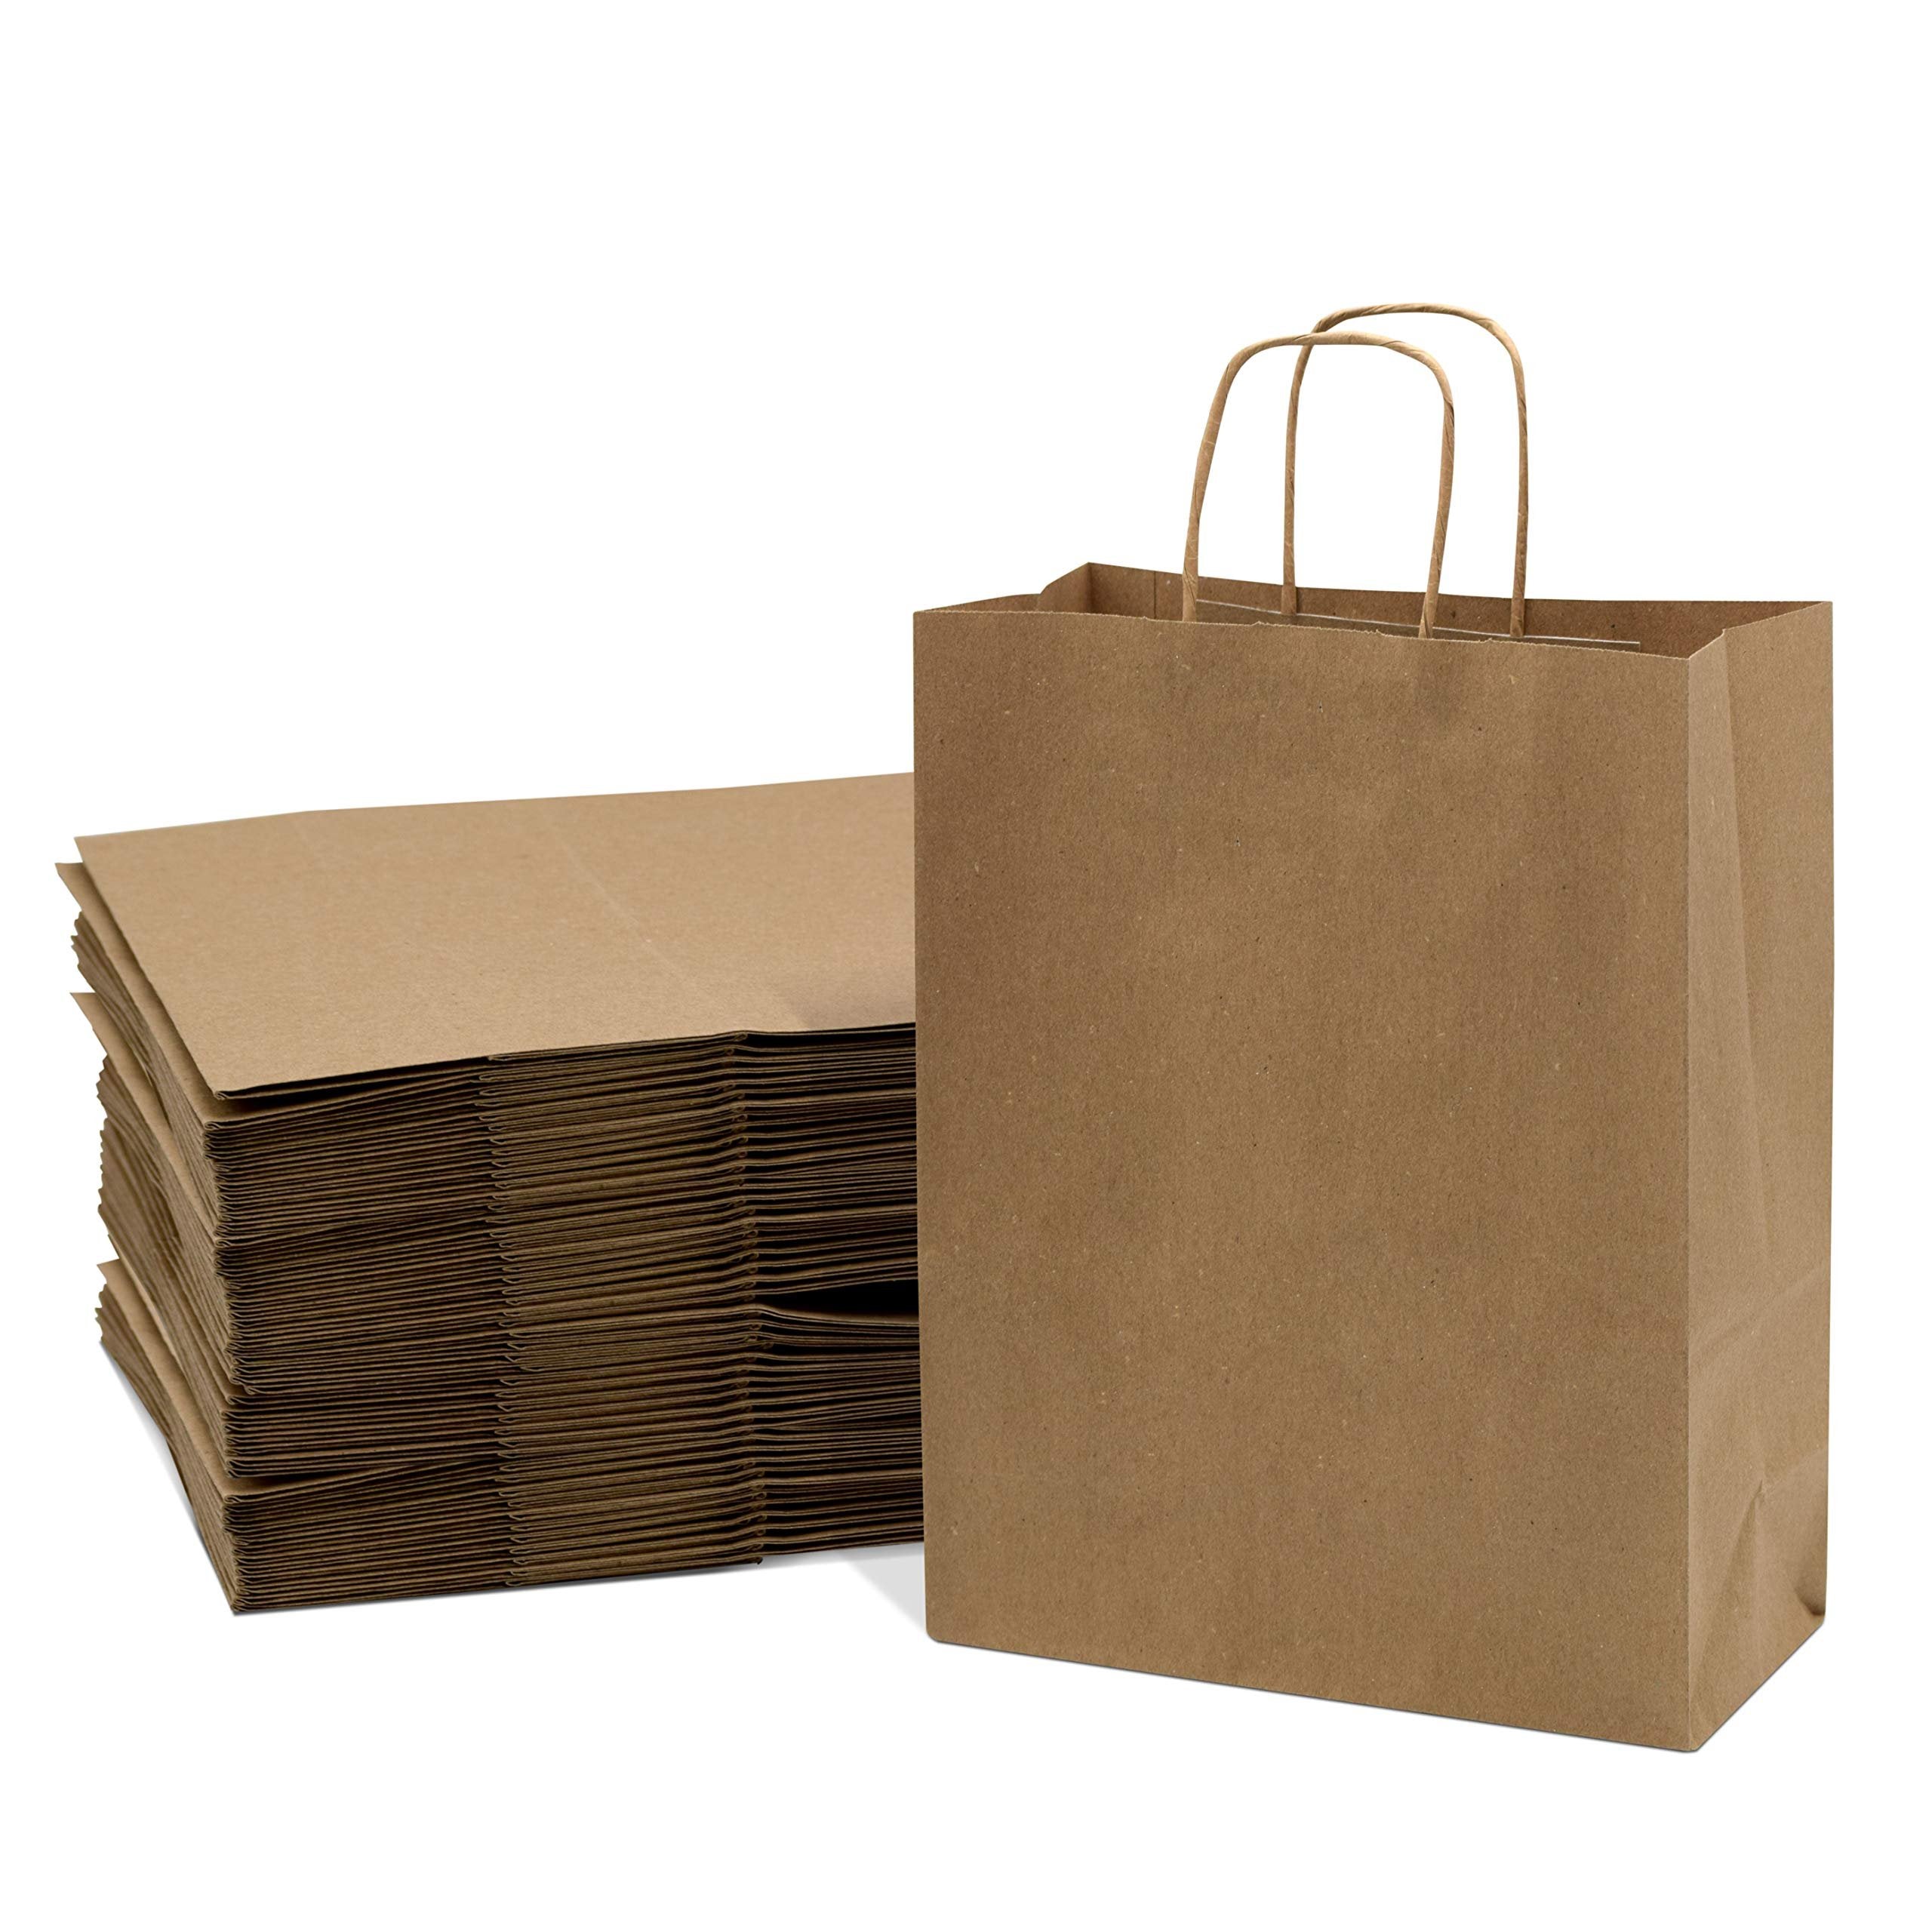 Brown Paper Bags with Handles - 10x5x13 inches 100 Pcs. Paper Shopping Bags, Bulk Gift Bags, Kraft, Party, Favor, Goody, Take-Out, Merchandise, Retail Bags, 80% PCW Debbie Size Medium Large